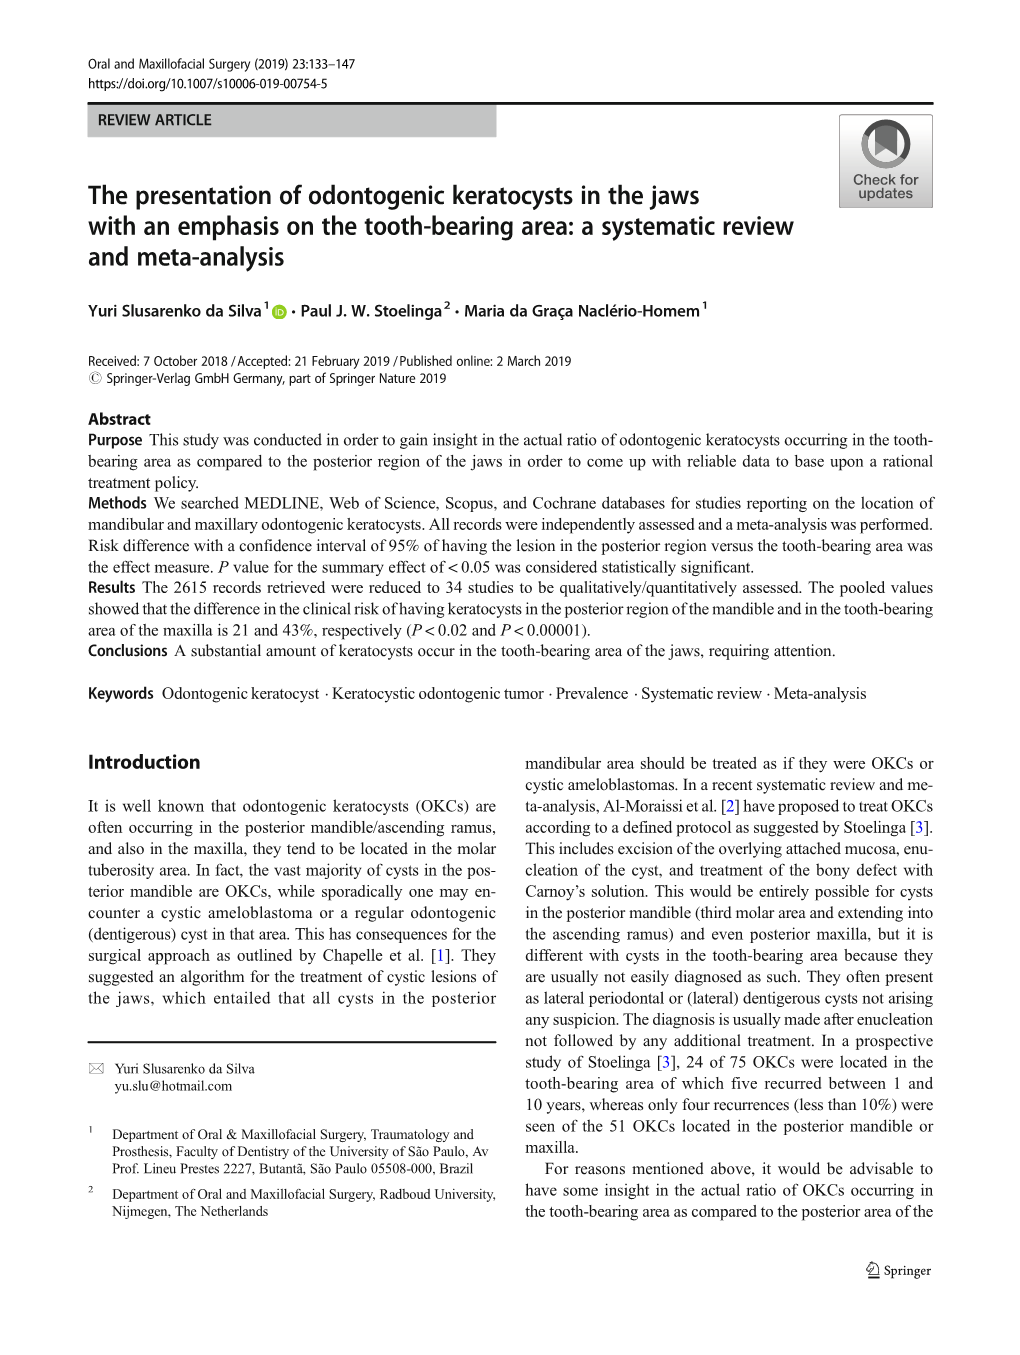 The Presentation of Odontogenic Keratocysts in the Jaws with an Emphasis on the Tooth-Bearing Area: a Systematic Review and Meta-Analysis